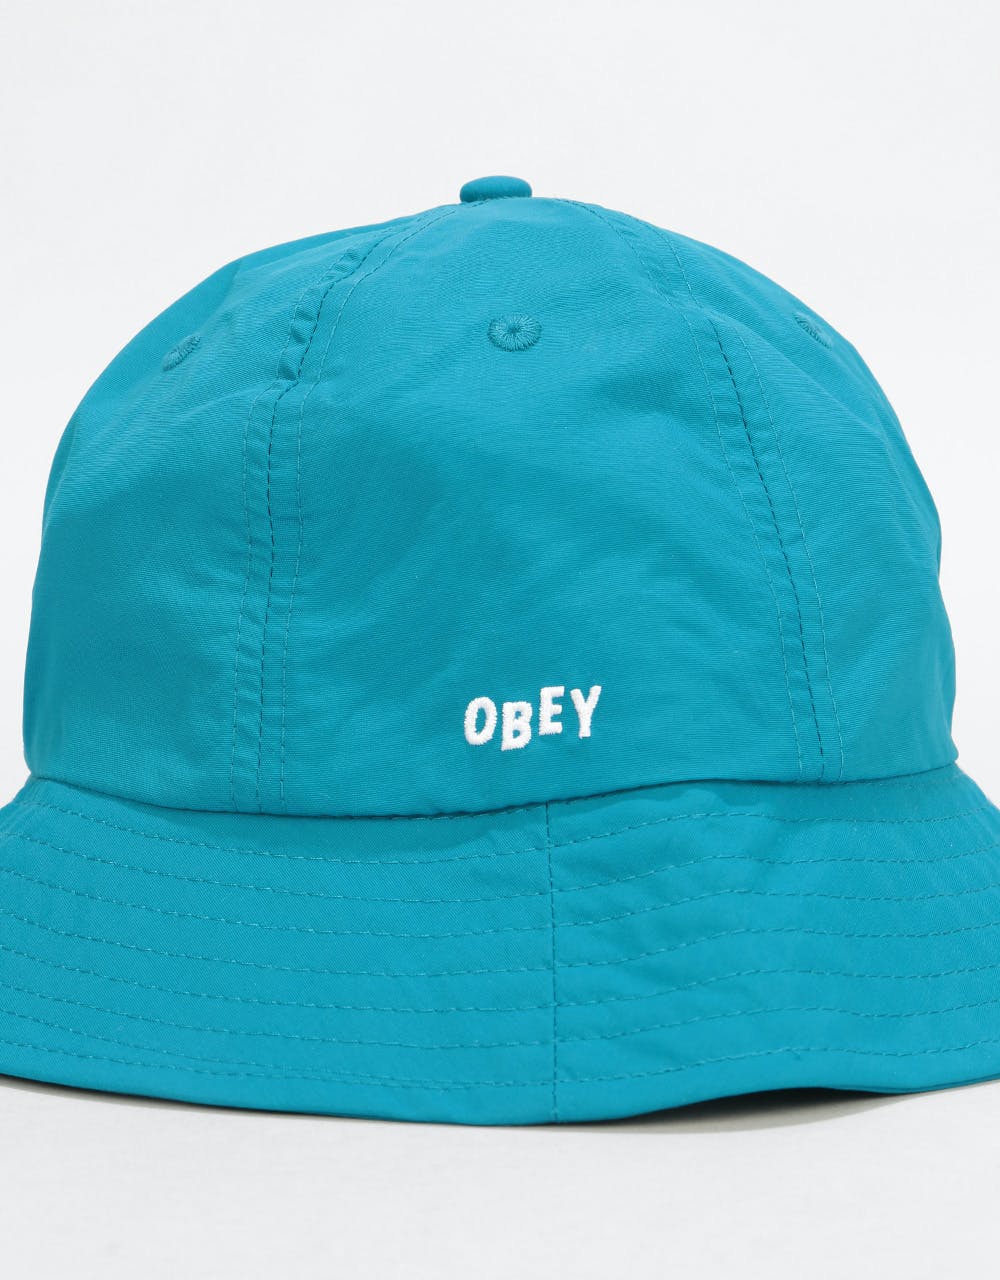 Obey Frederick Bucket Hat - Pure Teal